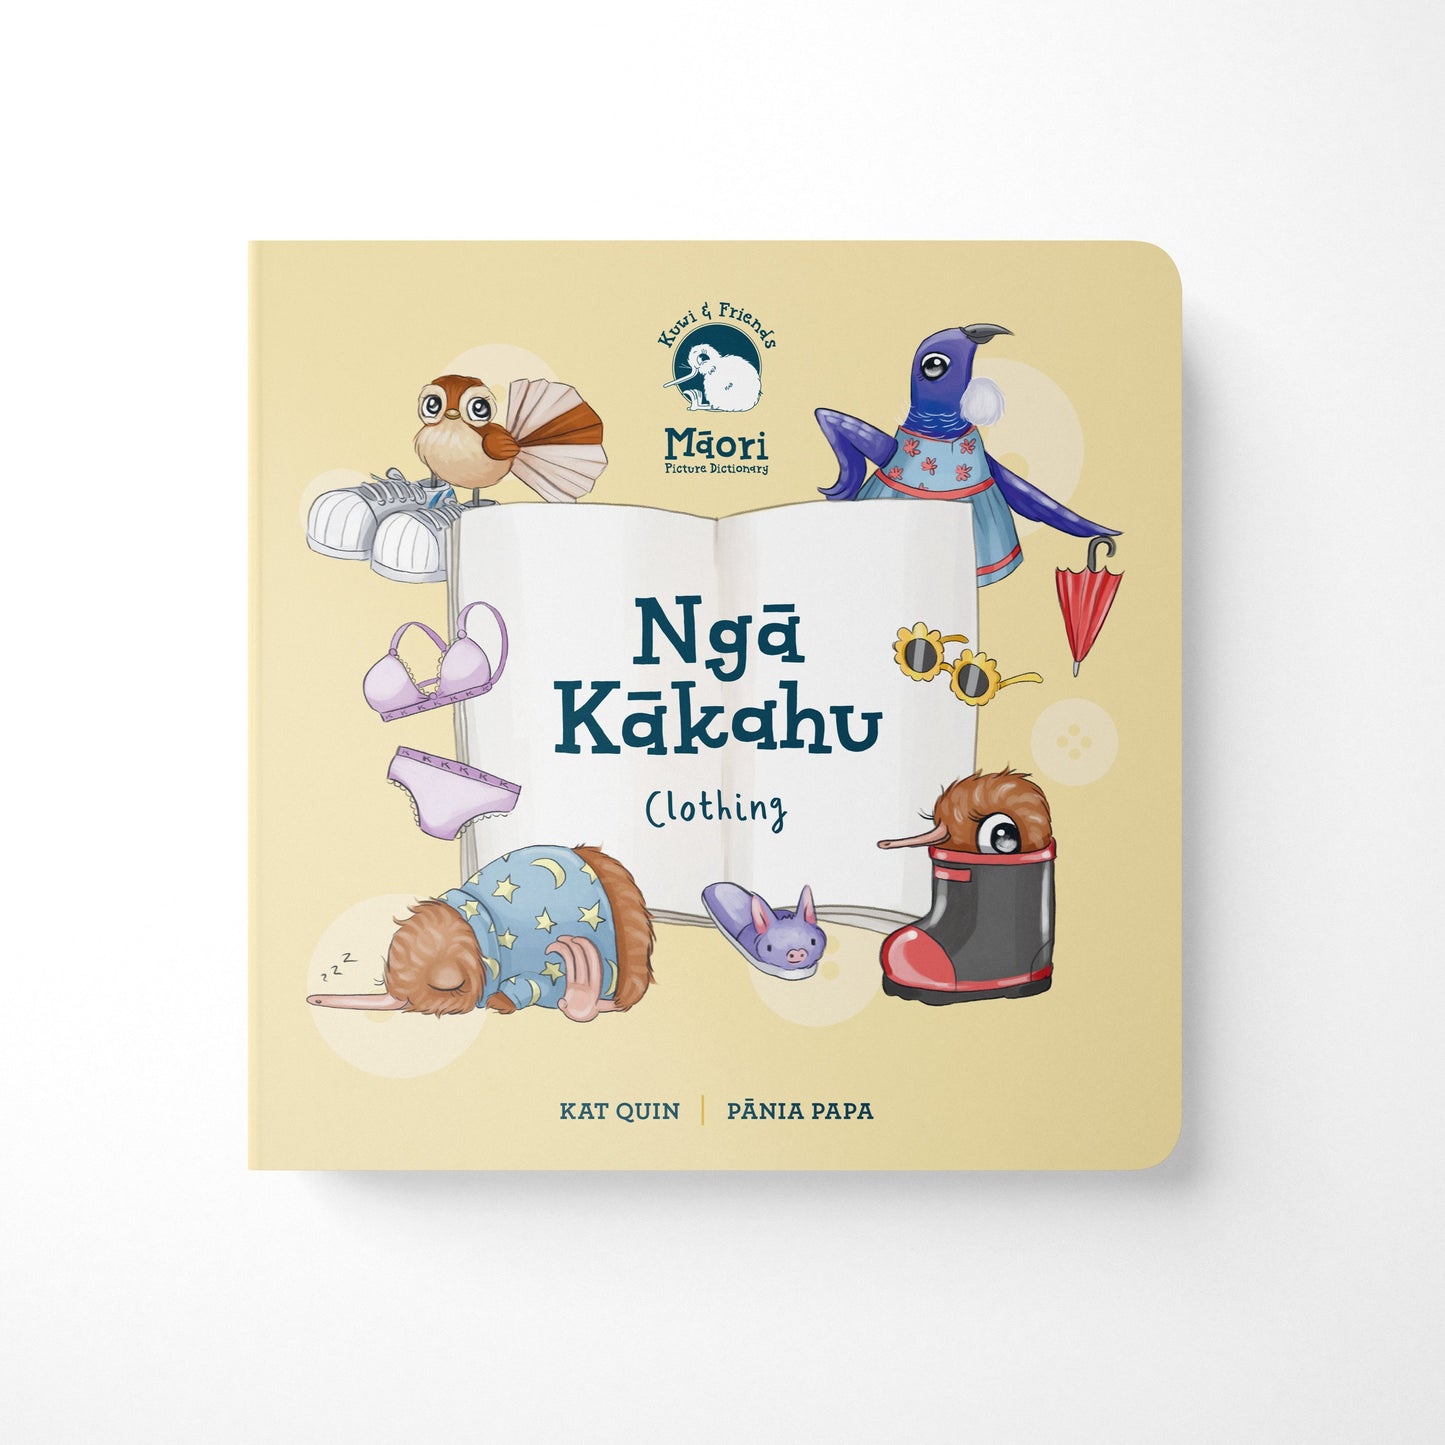 Kuwi & Friends: Ngā Kākahu - Clothing - Board Book. Native New Zealand birds modelling different clothing items against a yellow background.